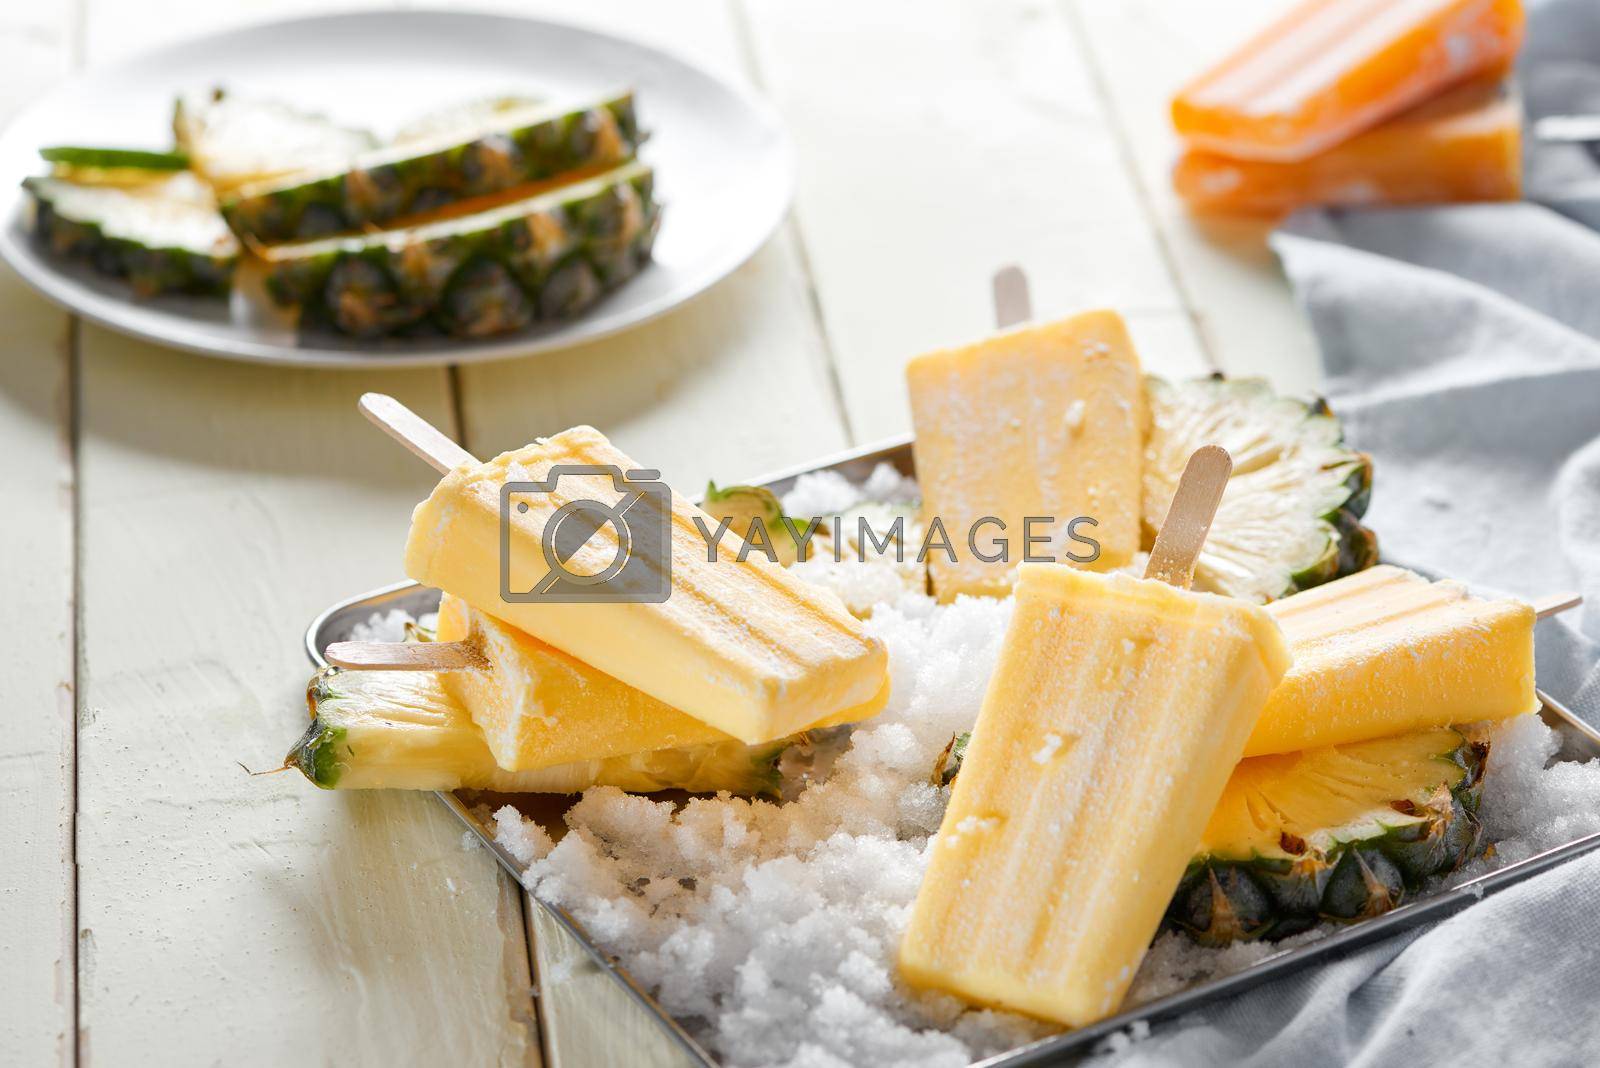 Royalty free image of Homemade popsicles with lemon and mint on a wooden table by makidotvn